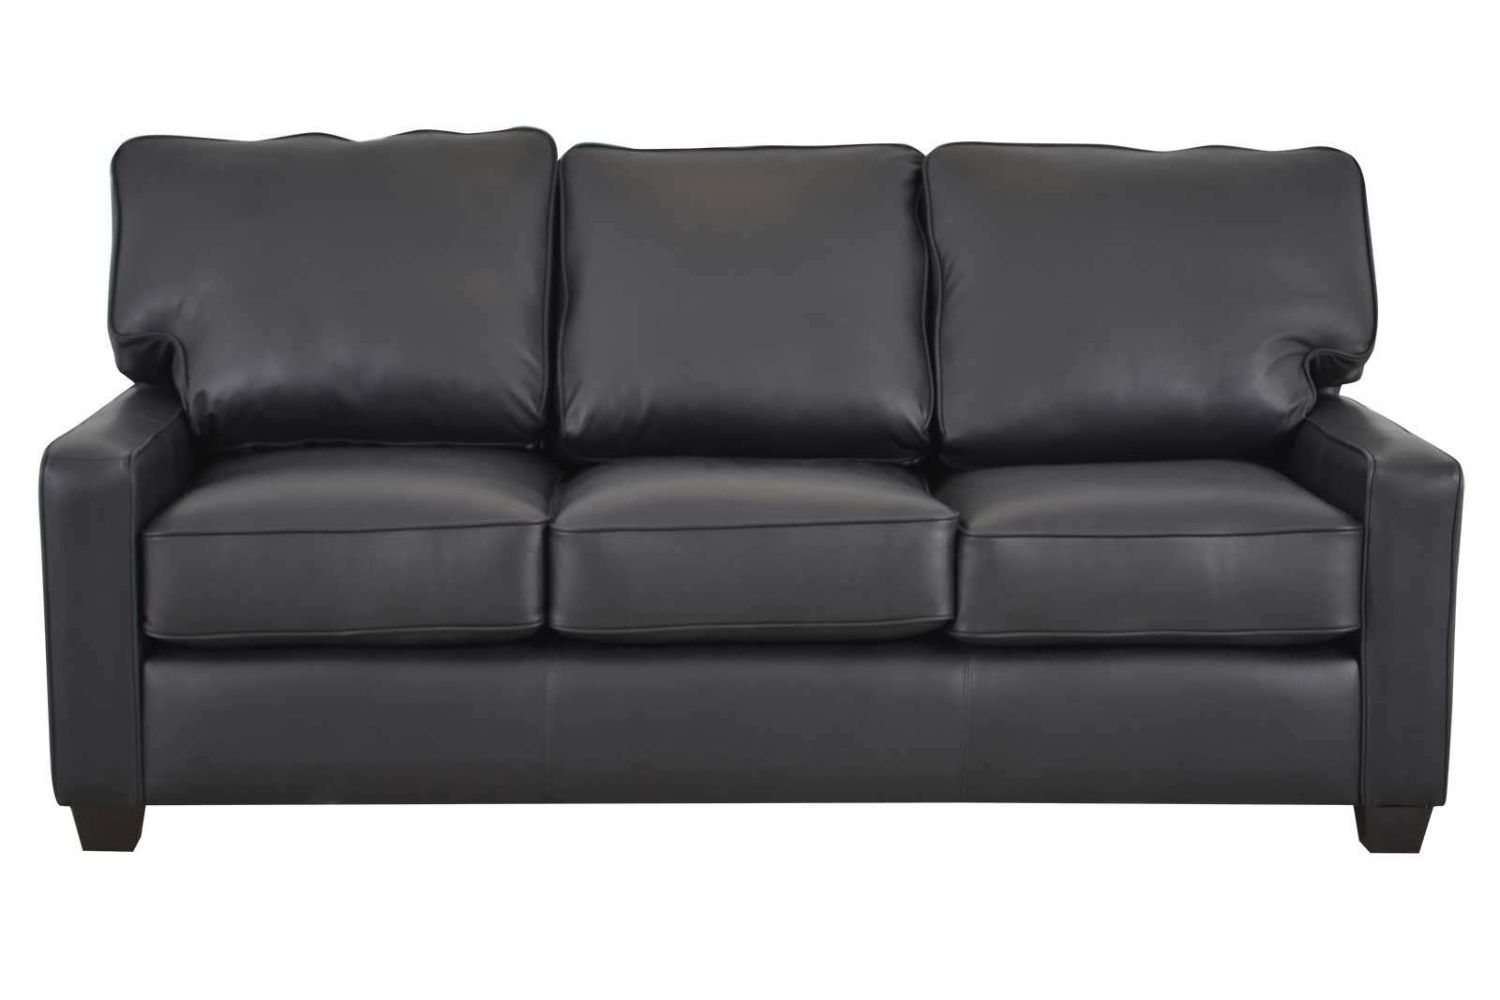 18-extraordinary-facts-about-black-couch